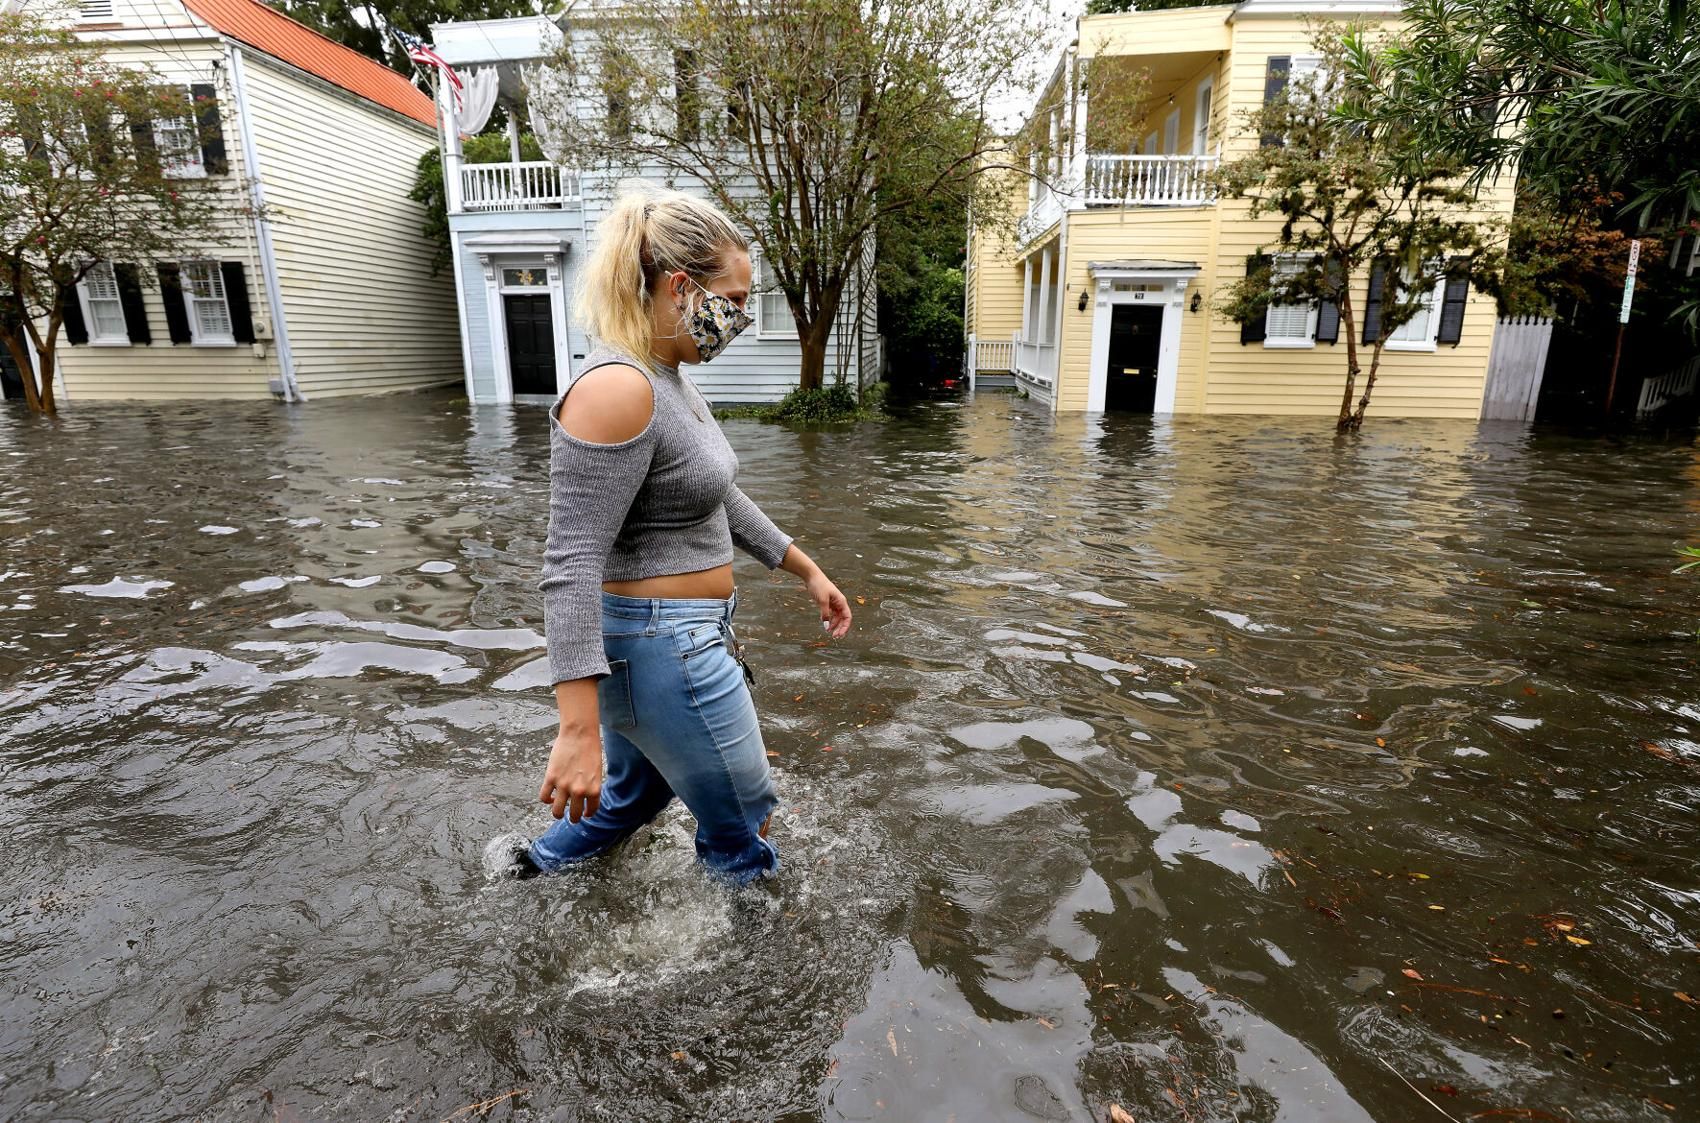 Kirstin Janssen walks through the flooded Vanderhorst Street on Friday, Sept. 25, 2020, in Charleston. Image by Grace Beahm Alford/Post and Courier Staff. United States, 2020.